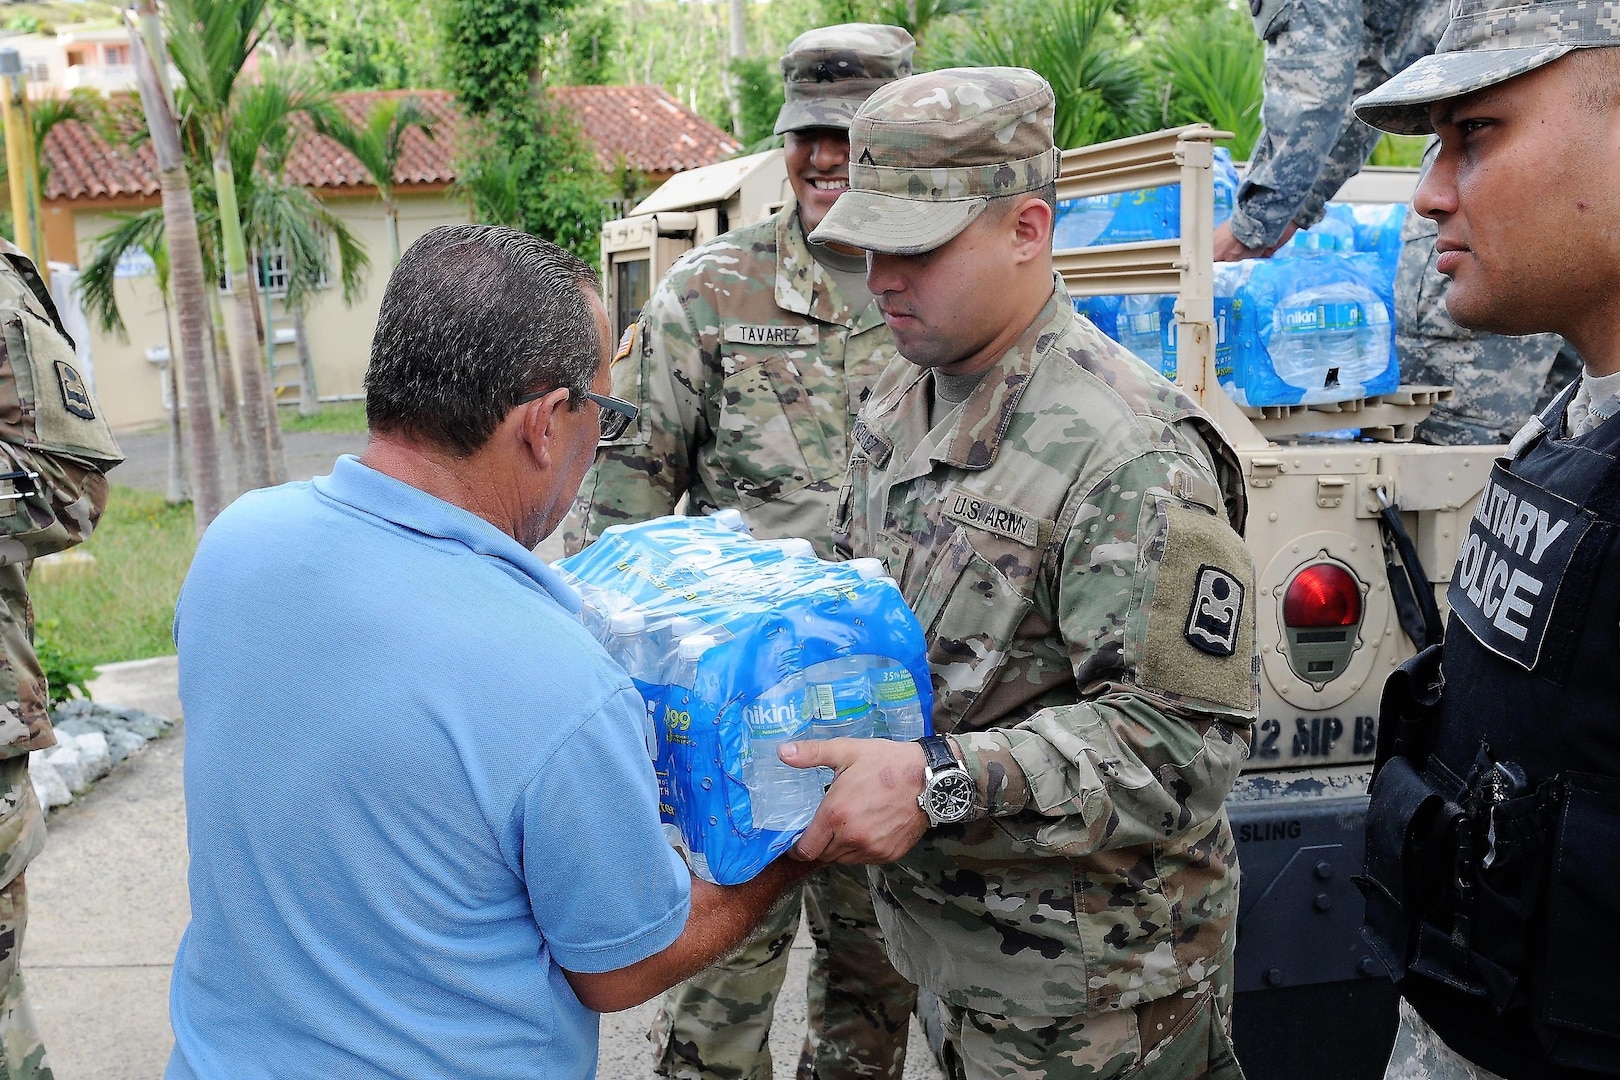 Puerto Rico Army National Guard soldiers continue their efforts of distributing much-needed supplies to communities around the Island in the aftermath of Hurricane Maria in Cidra, Puerto Rico, Nov 27, 2017.